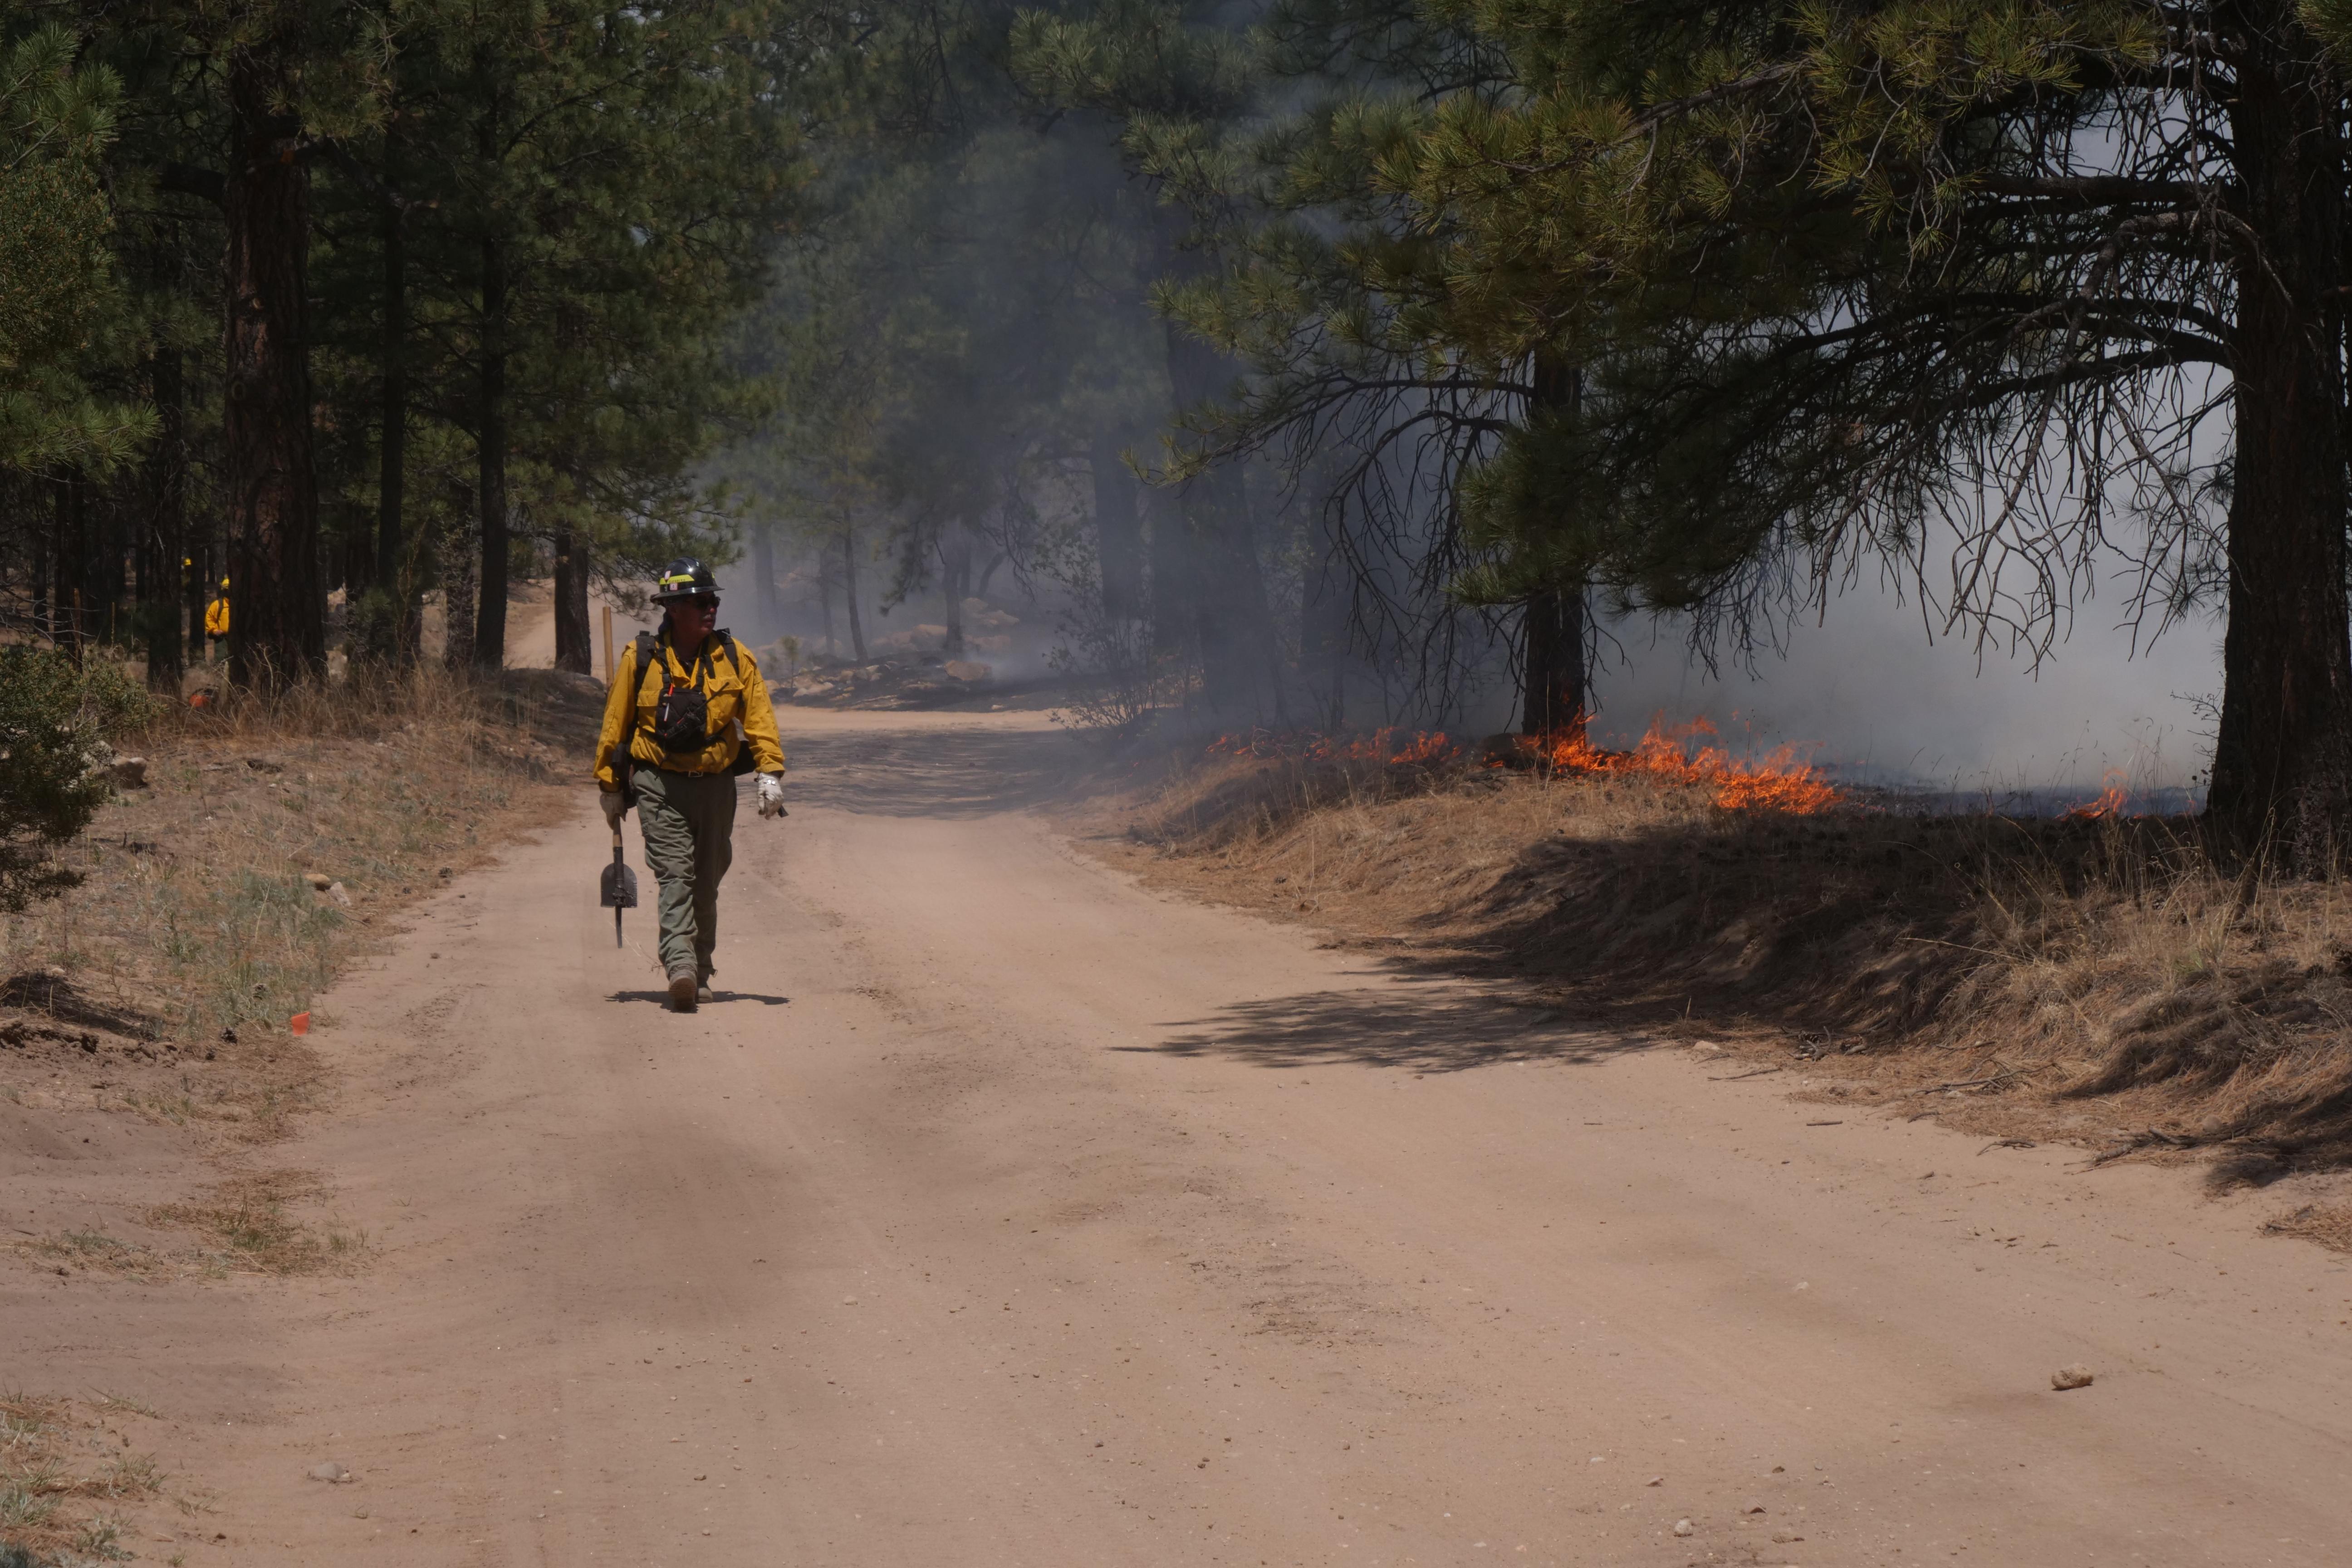 A firefighter patrols a dirt road as low fire edges along the forest floor.